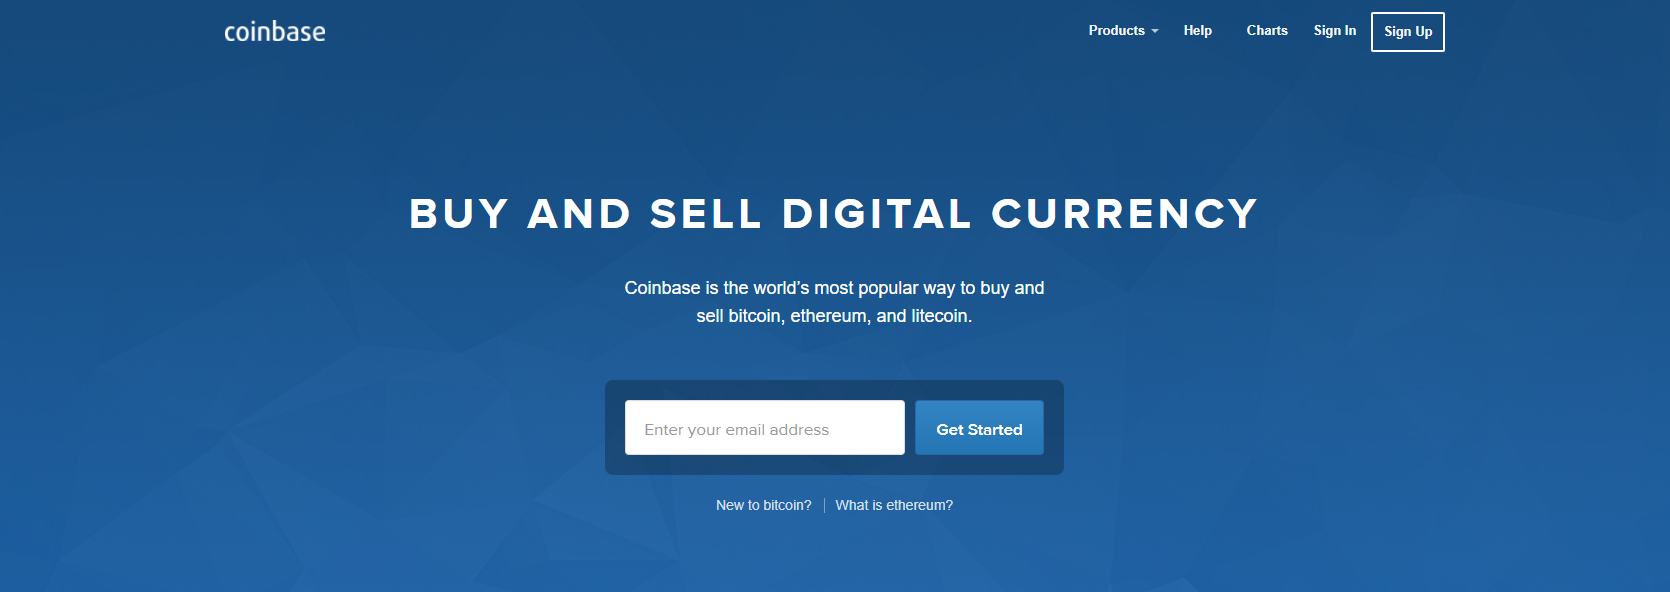 how to create a coinbase wallet account